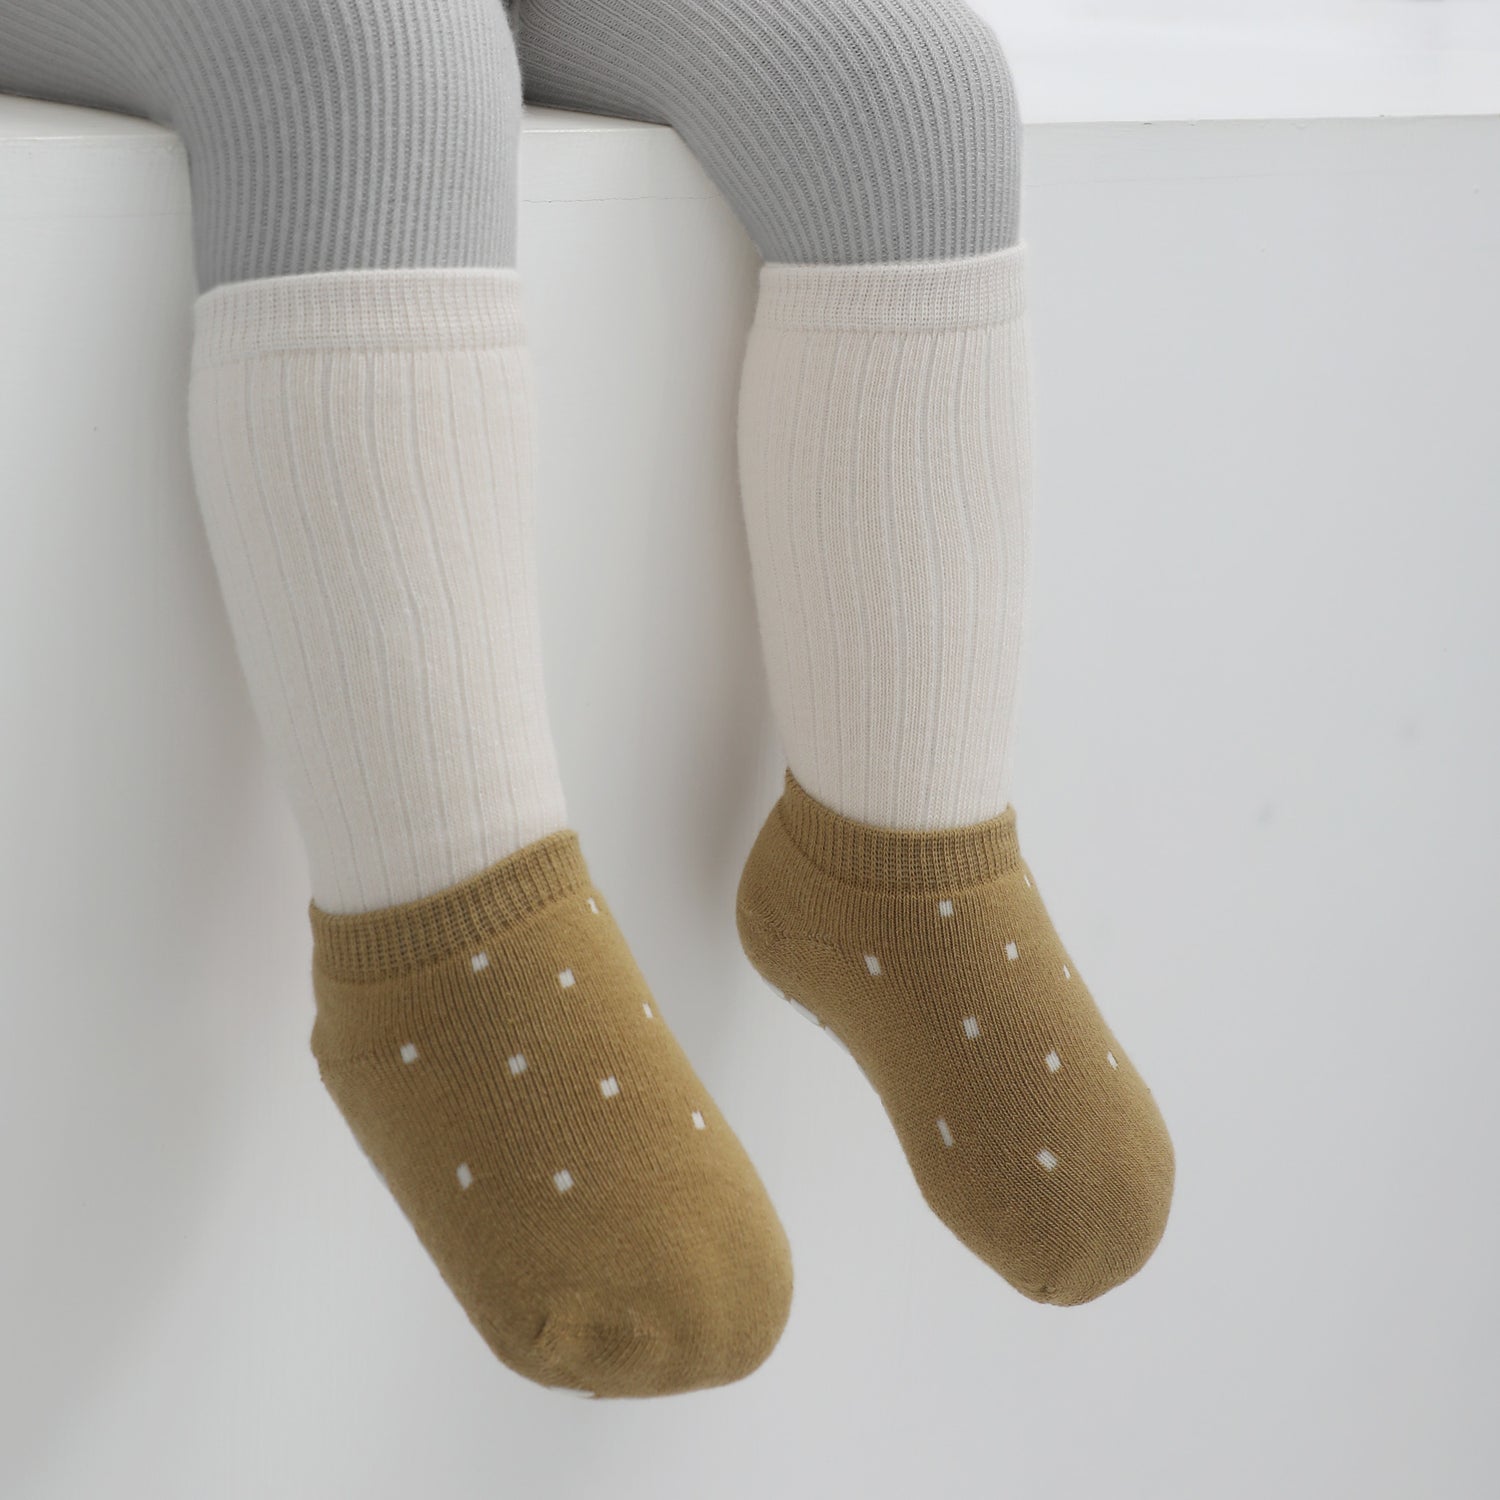 Cheerful and colorful non-slip skid socks for kids, decorated with entertaining grips.